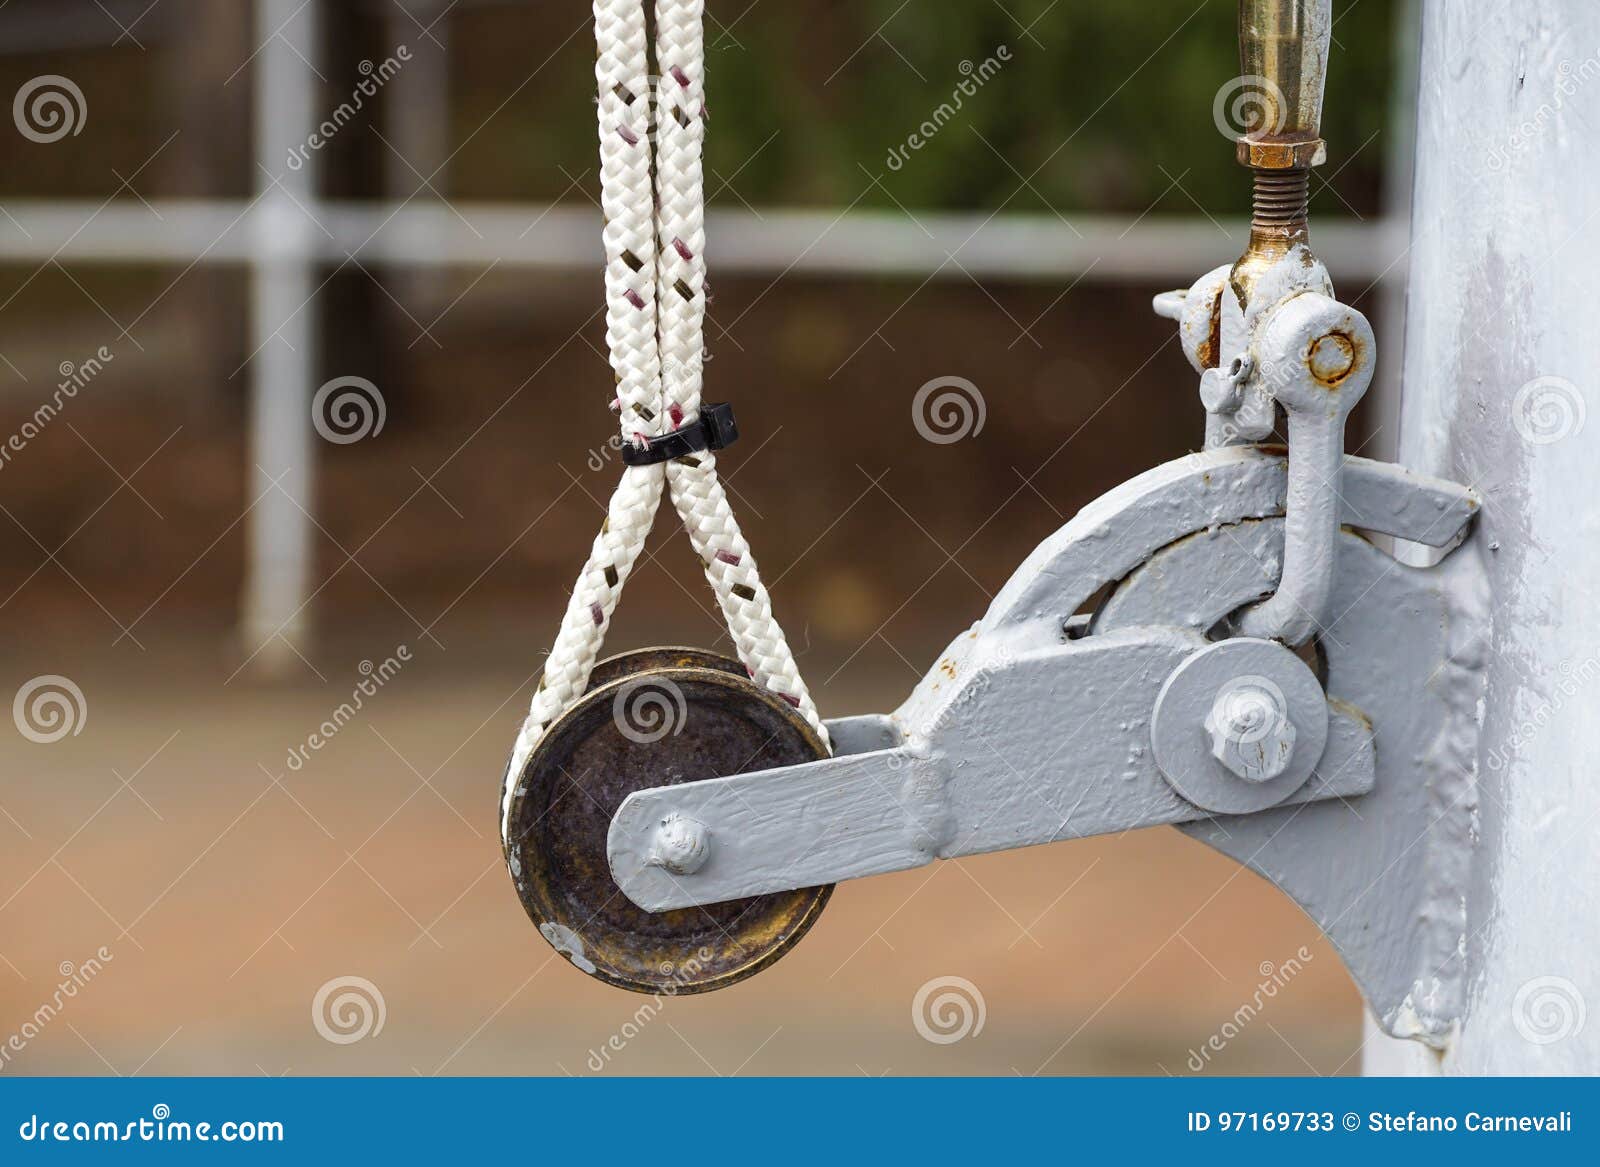 The Pulley for Pulling the Flag on the Pole Stock Image - Image of